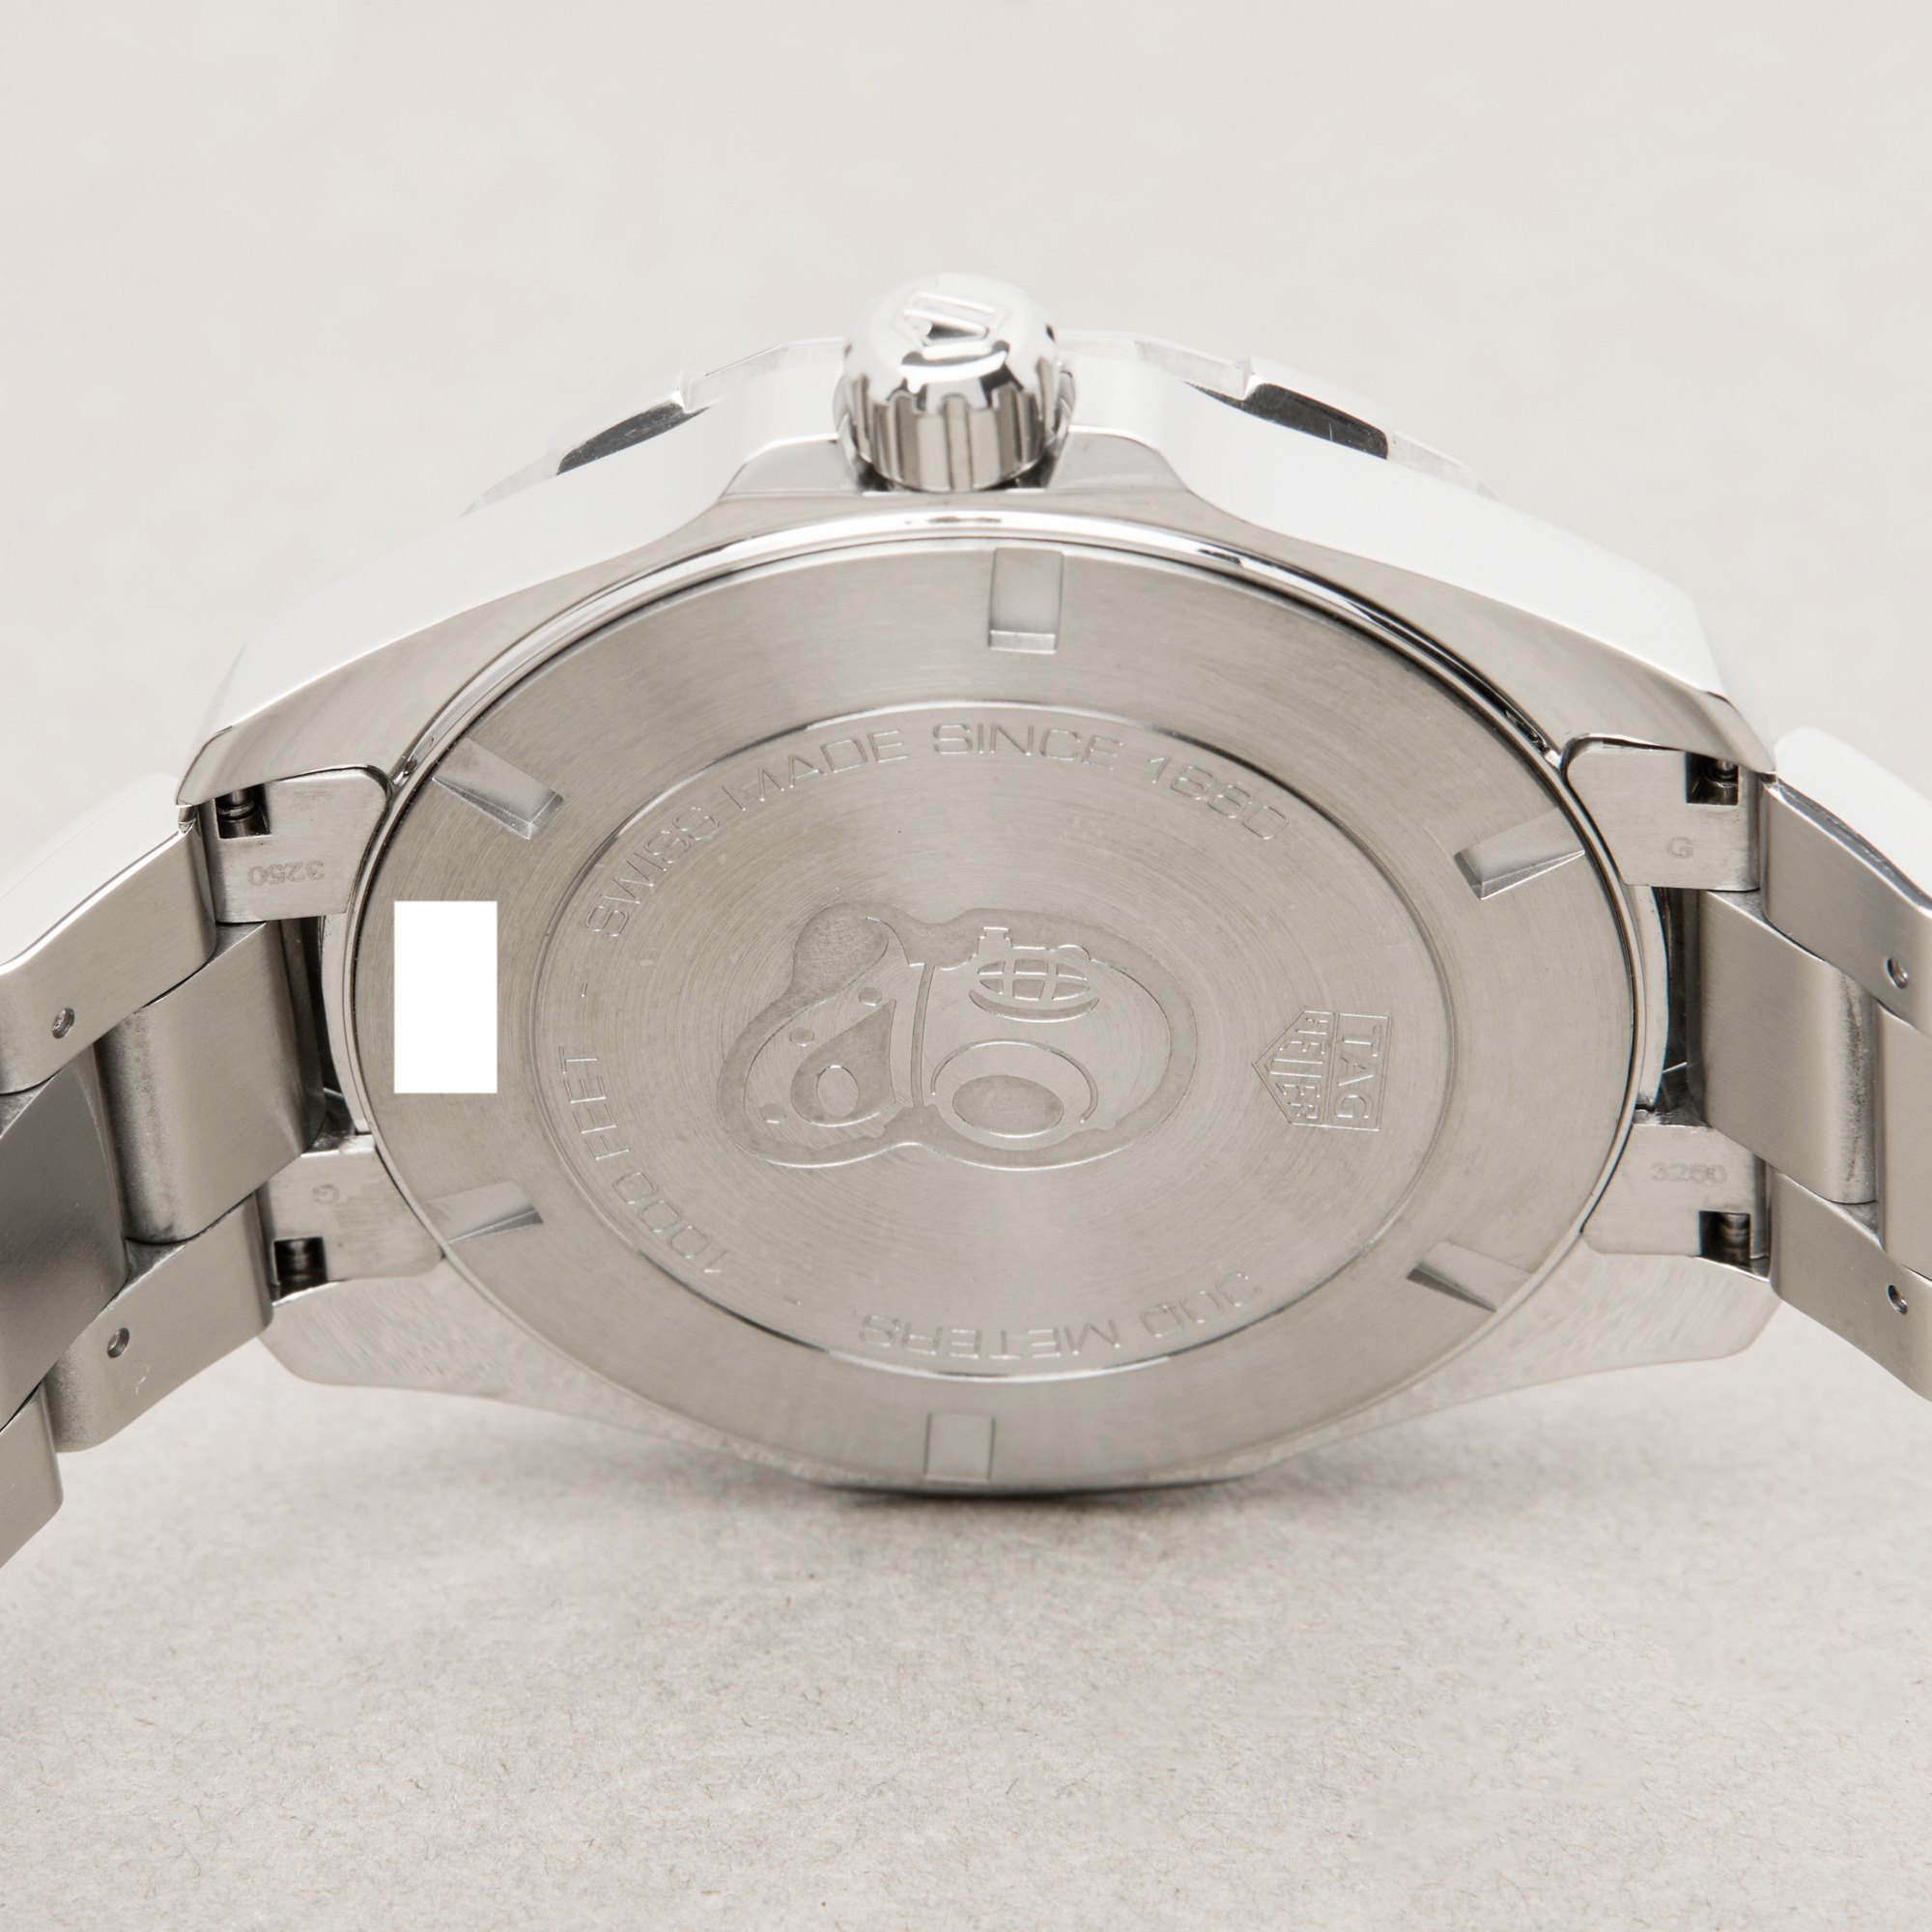 Tag Heuer Aquaracer Stainless Steel WAY101A.BA0746